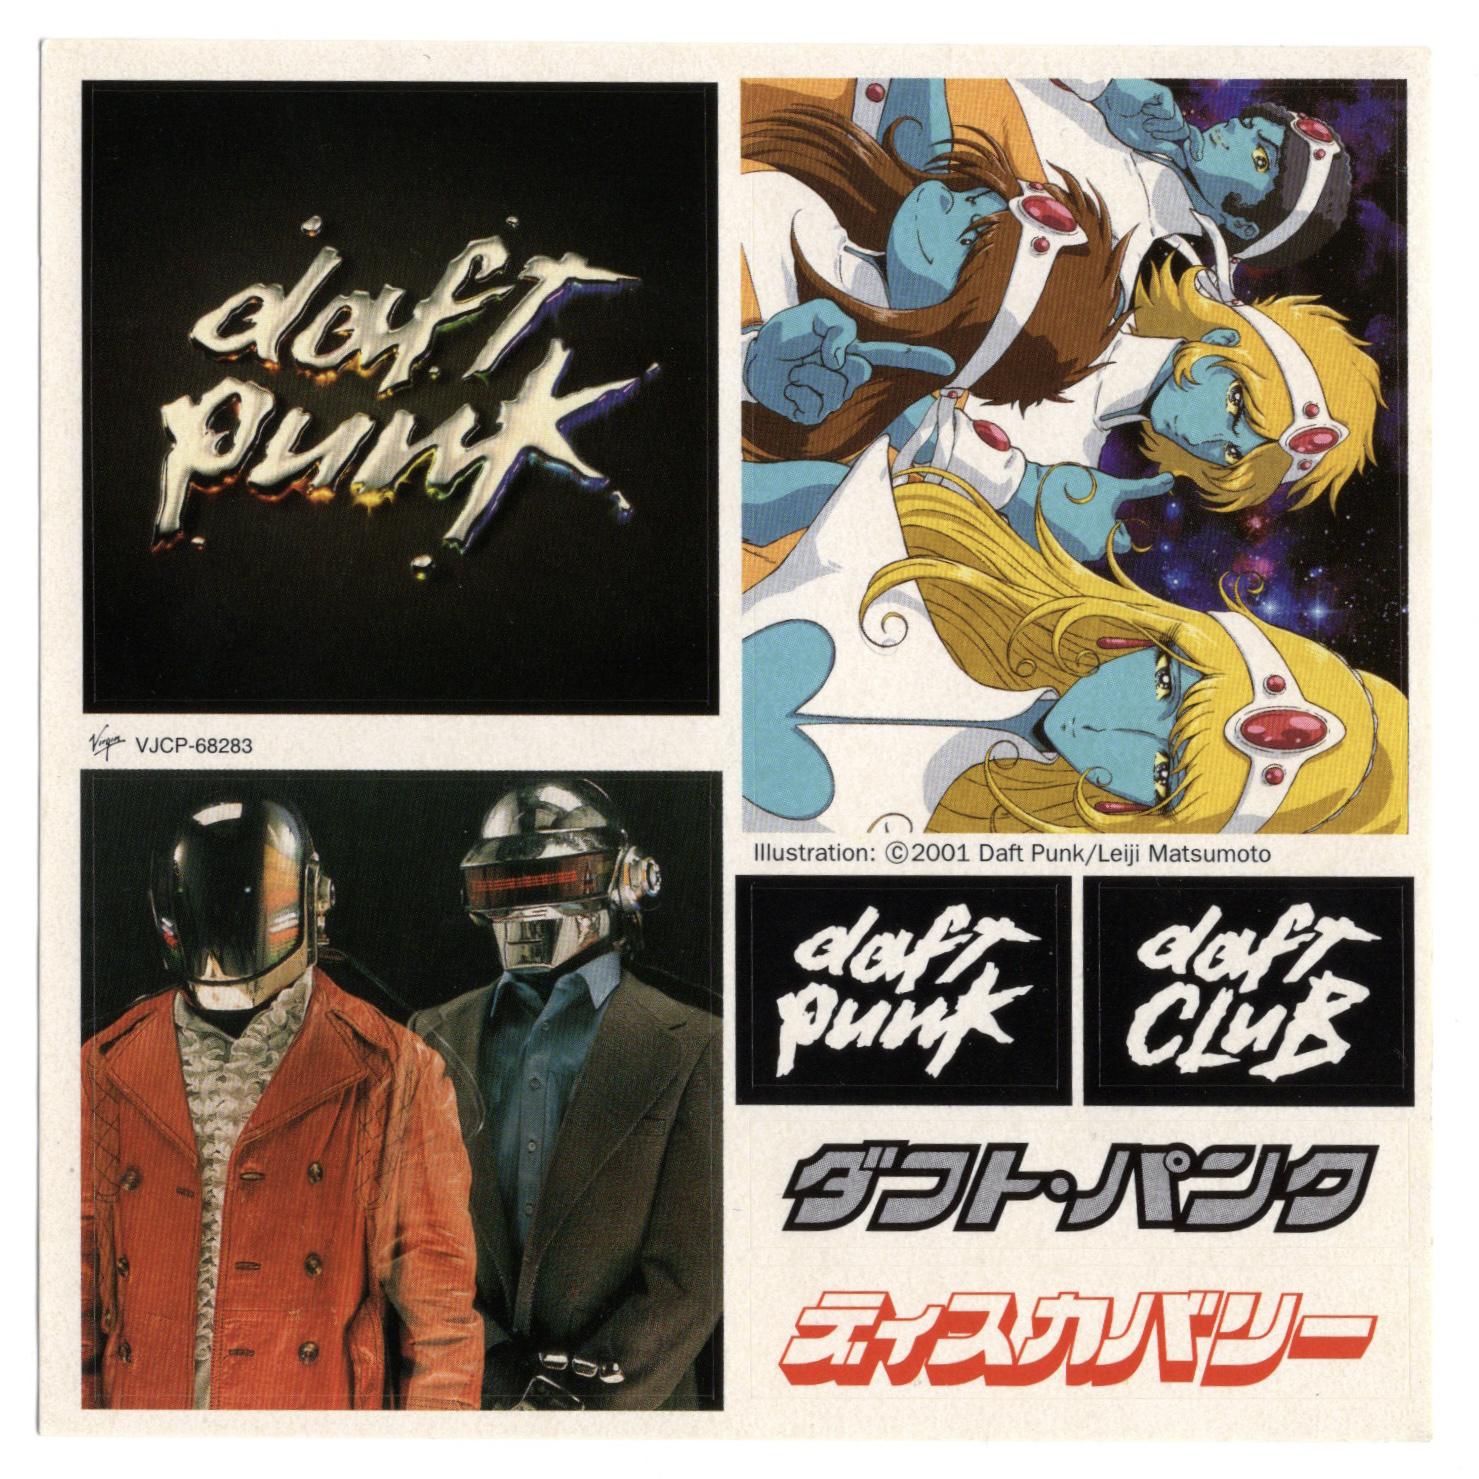 discovery by daft punk stickers